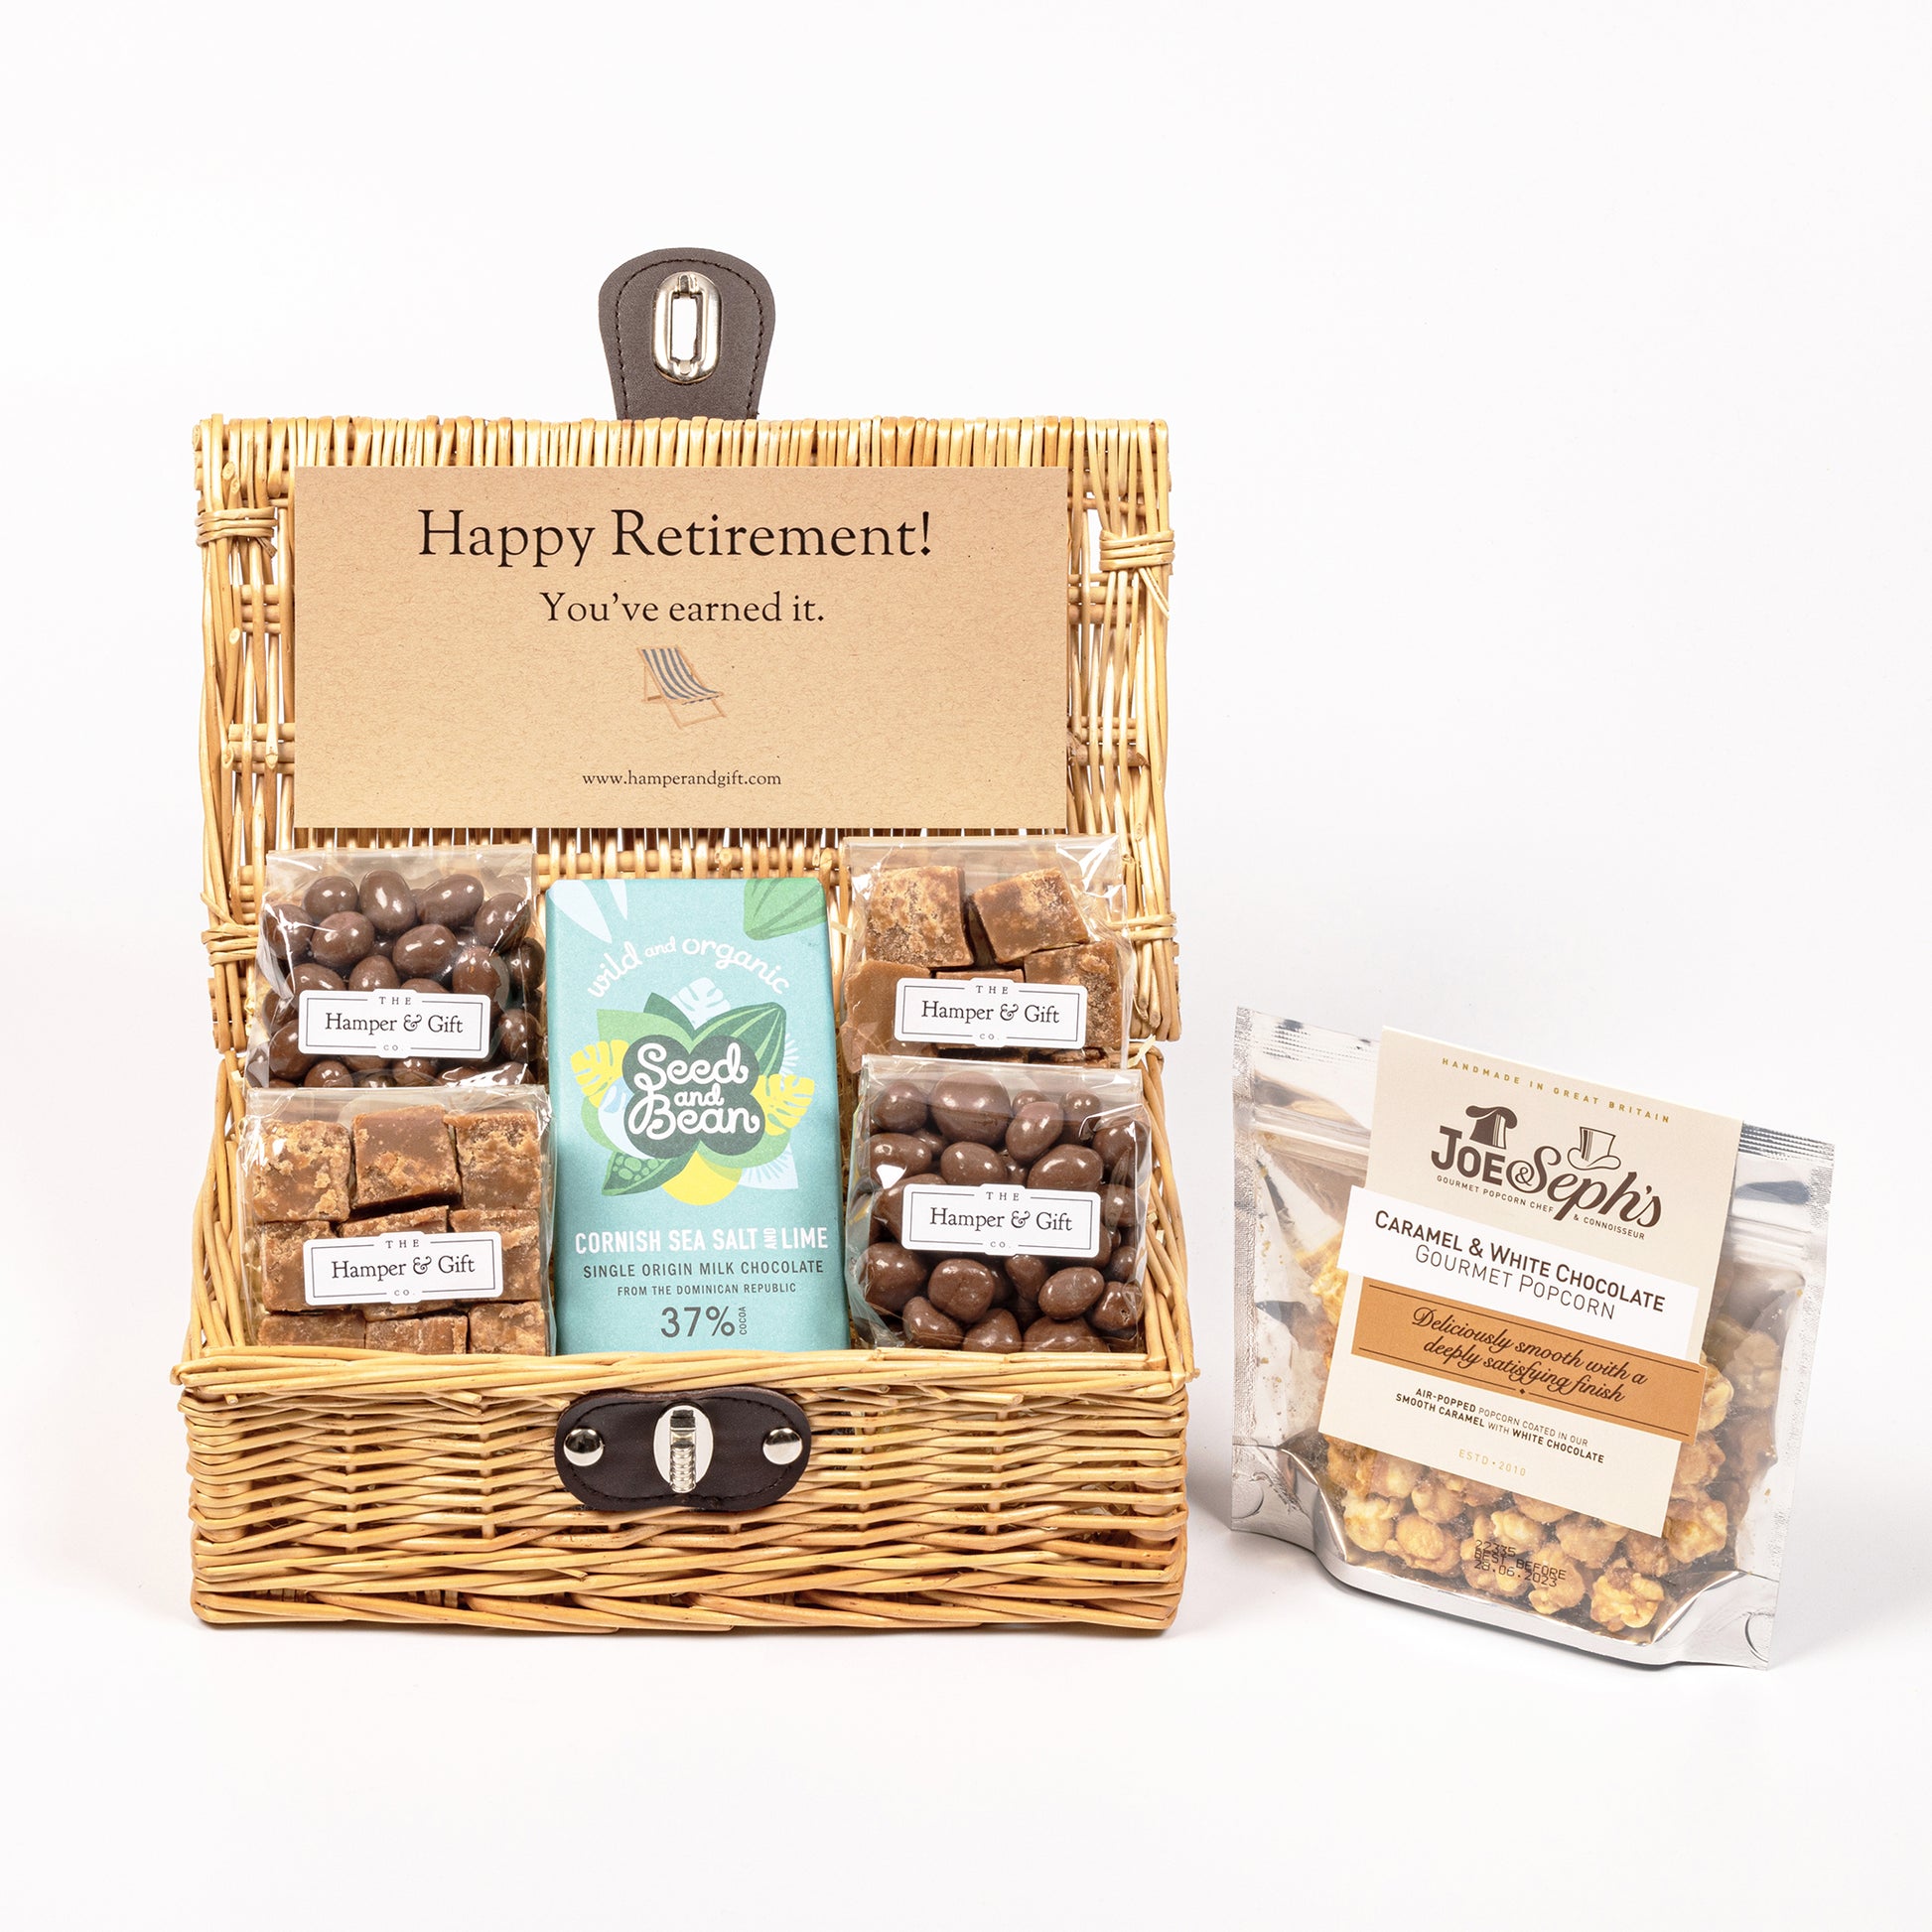 Little Retirement Hamper filled with chocolate, fudge and gourmet popcorn